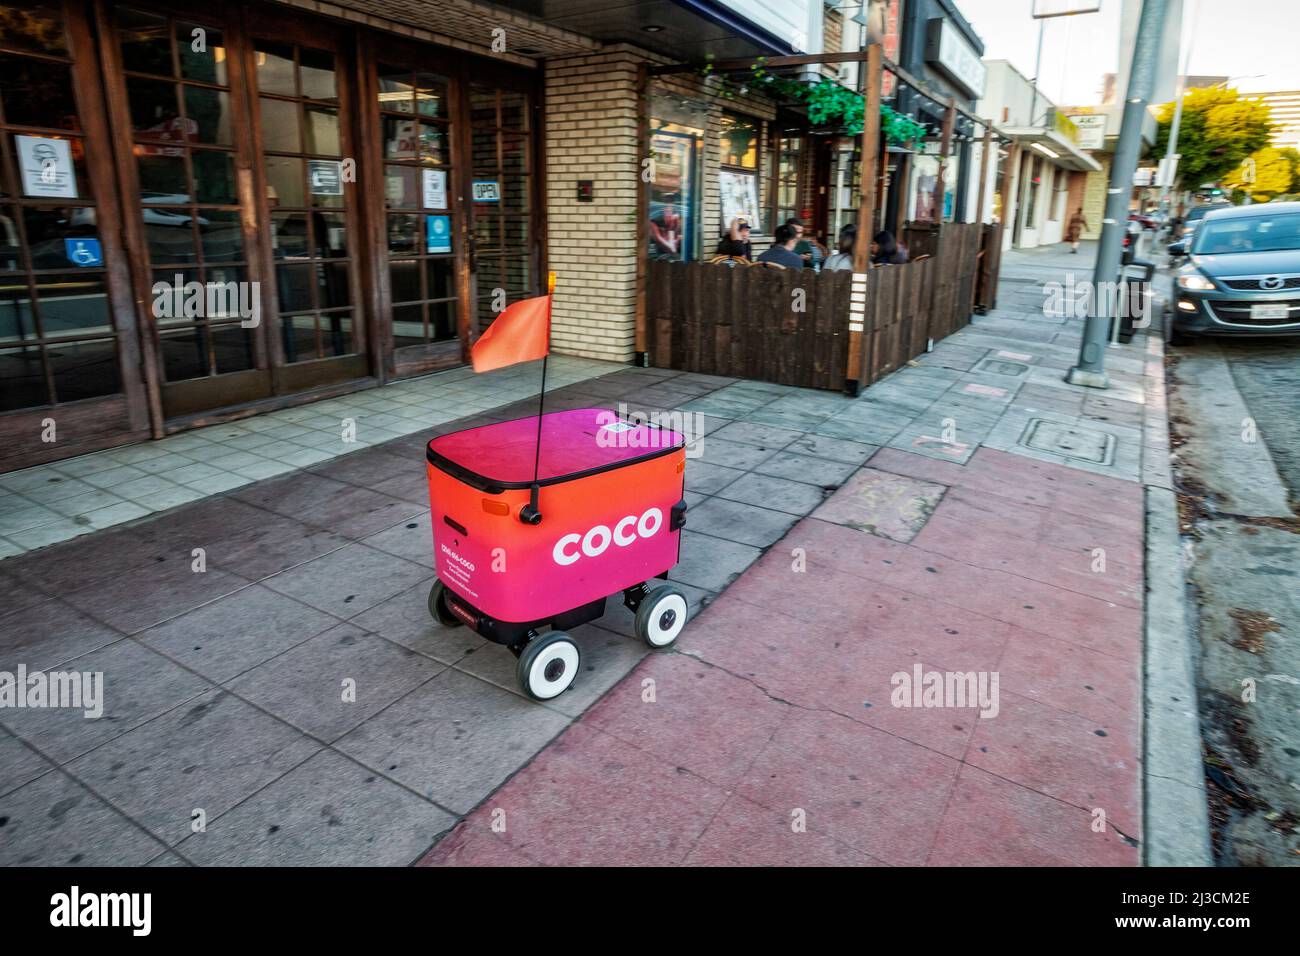 Coco food delivery robot, West Los Angeles, California Stock Photo